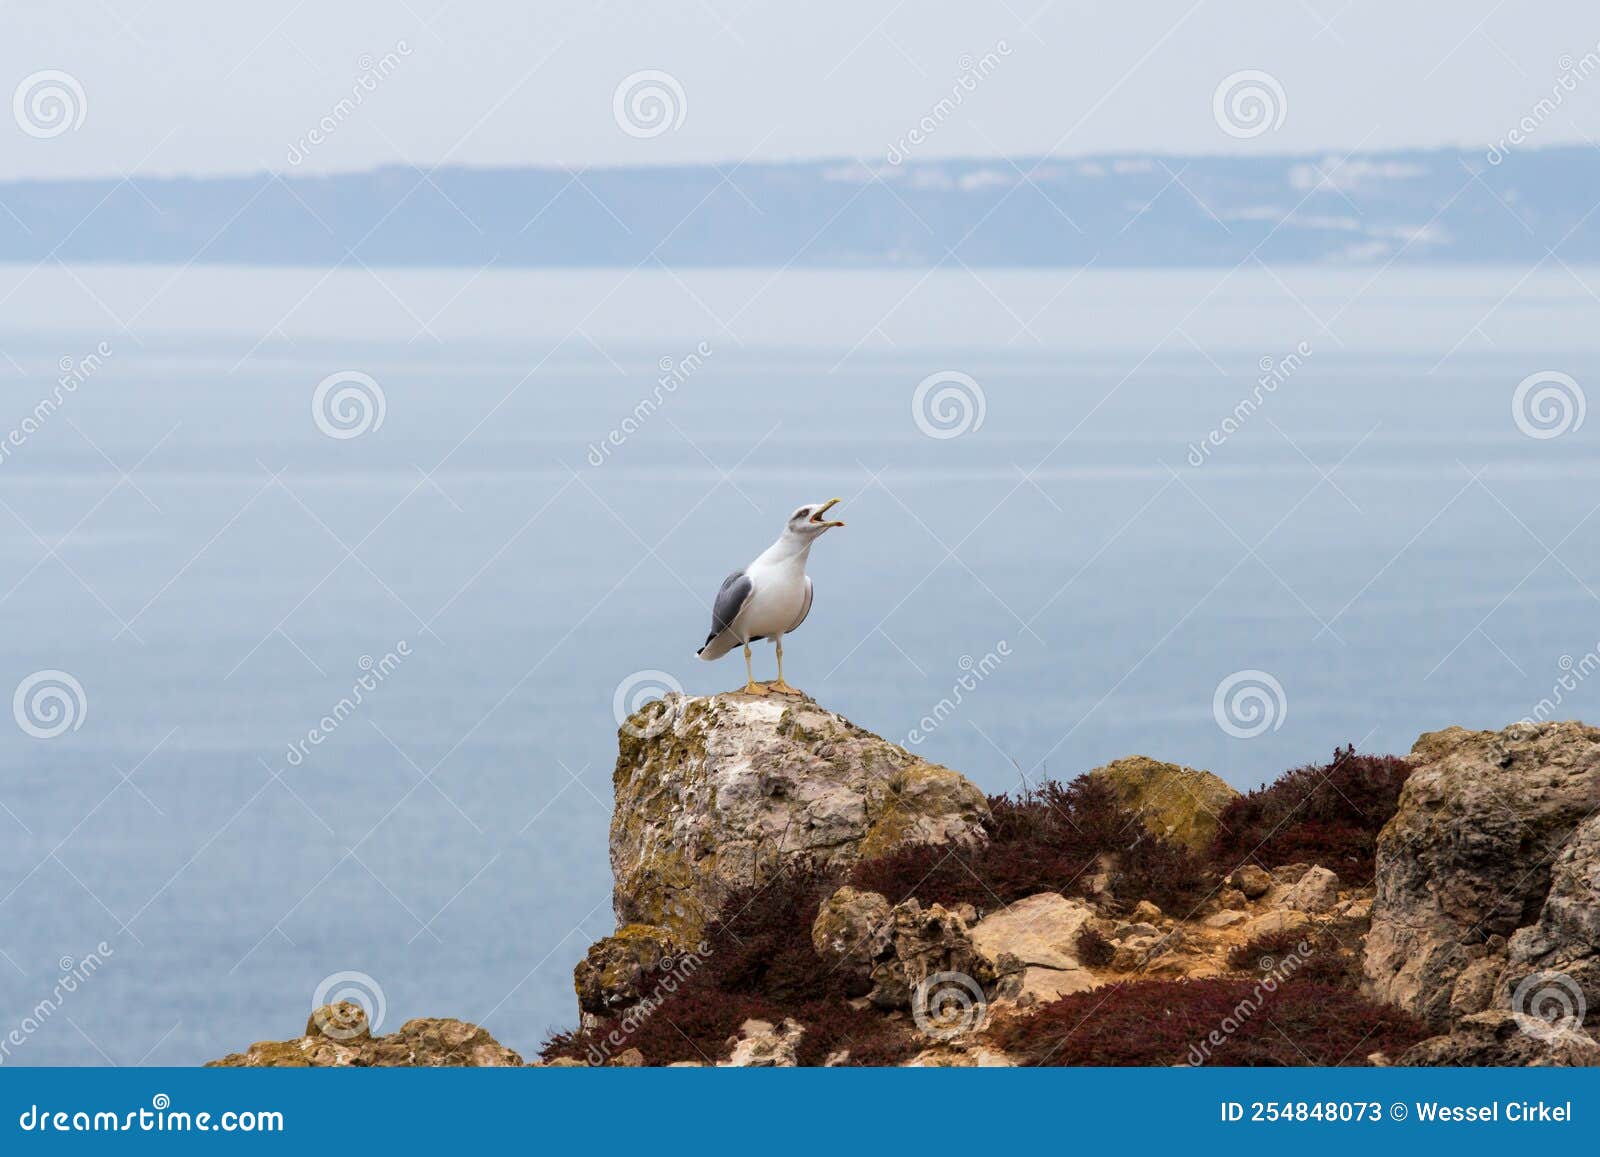 crying yellow-legged gull on the rocks in the south of portugal